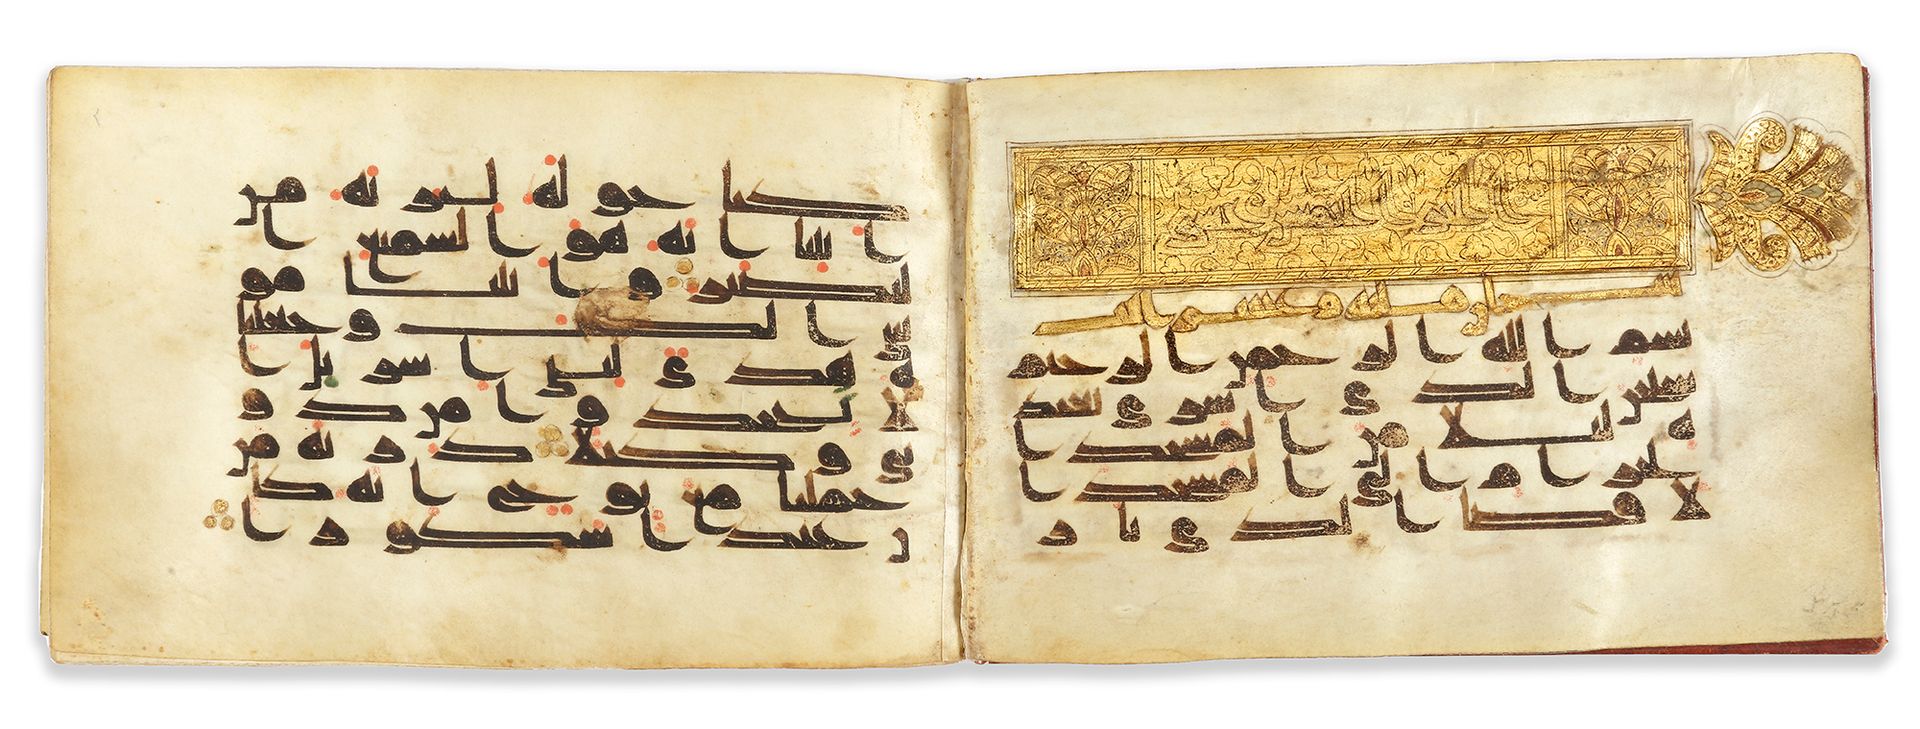 AN EASTERN KUFIC SECTION ON VELLUM, NORTH AFRICA OR NEAR EAST, 9TH CENTURY Arabi&hellip;